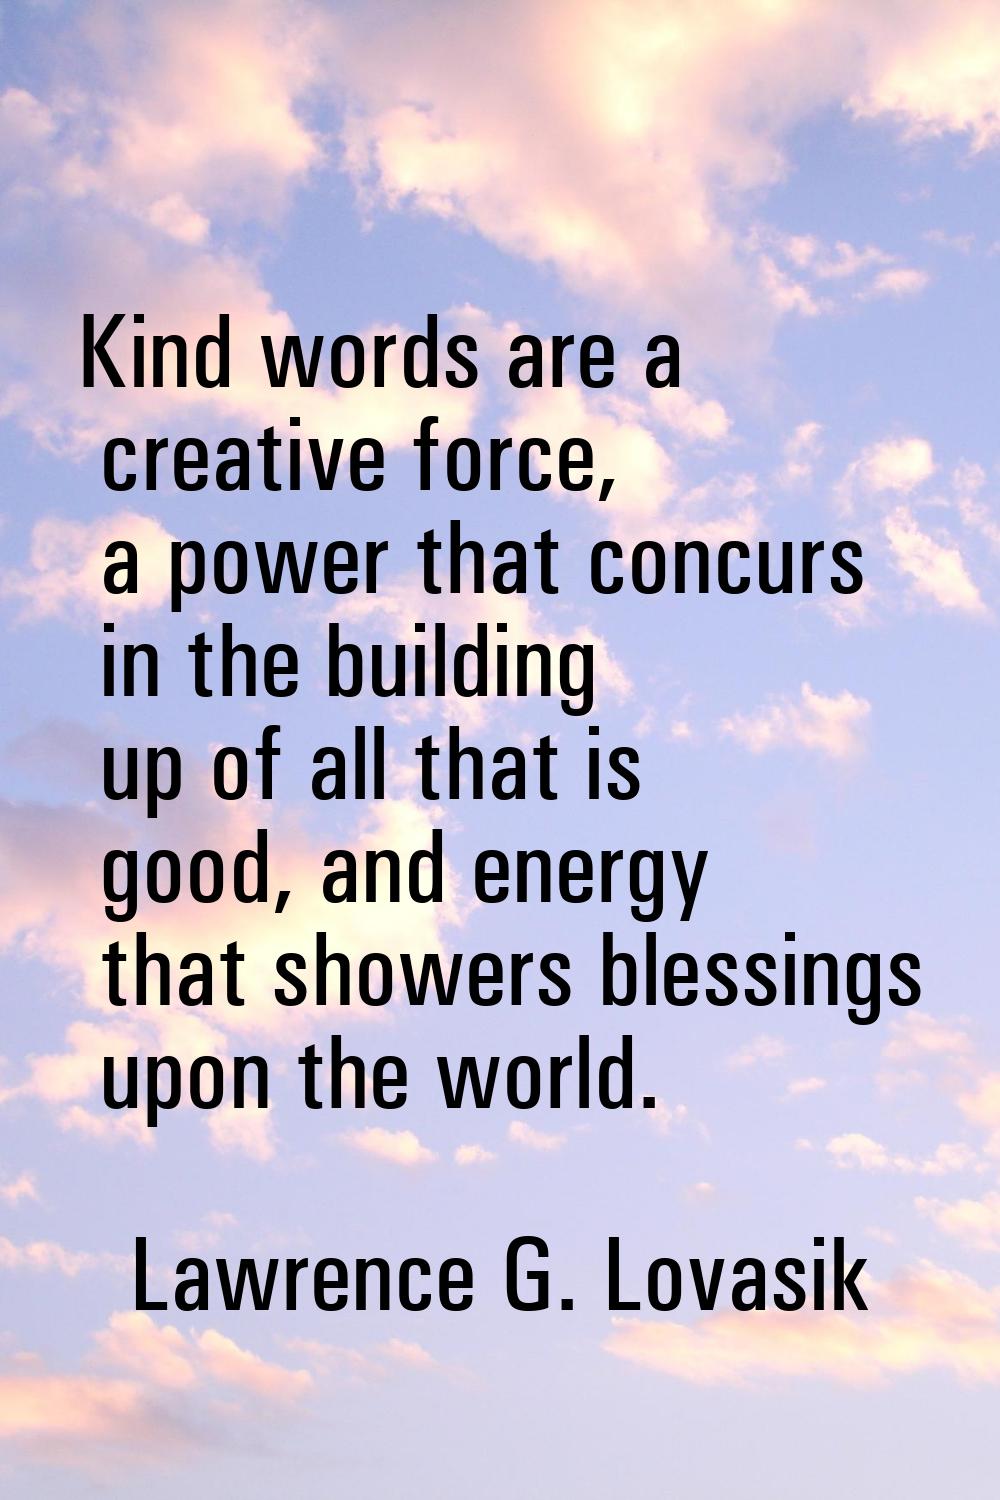 Kind words are a creative force, a power that concurs in the building up of all that is good, and e